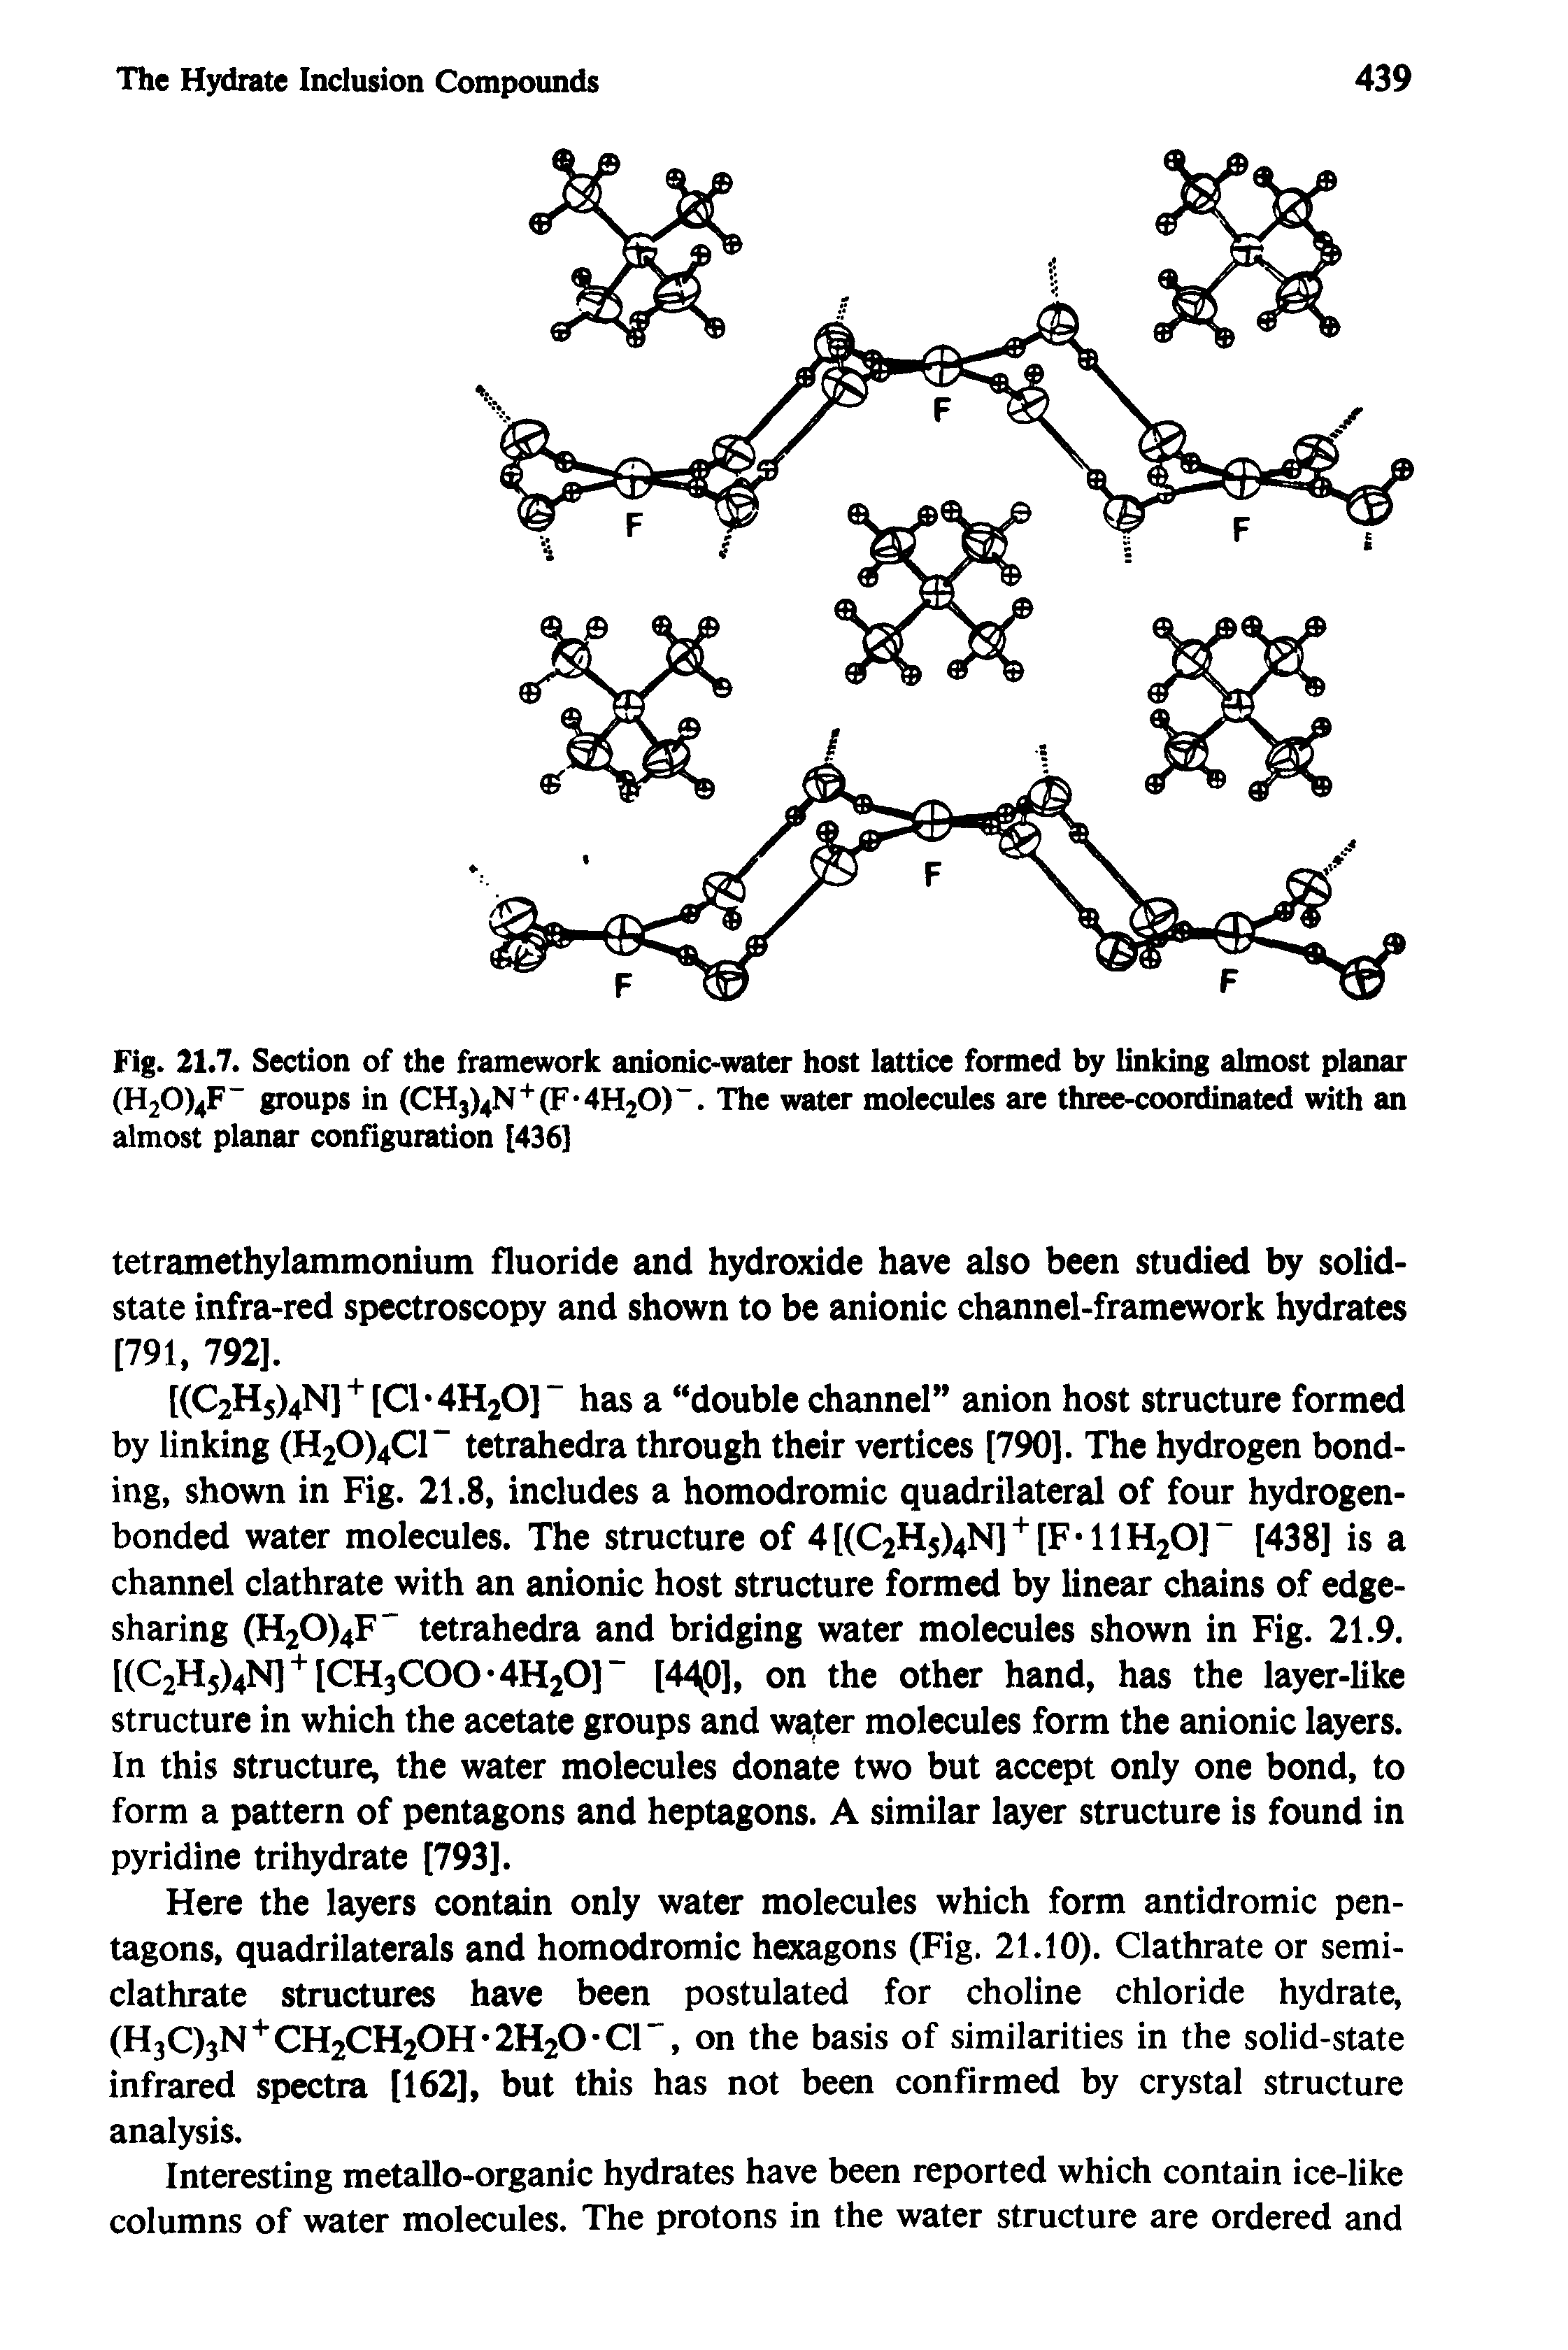 Fig. 21.7. Section of the framework anionic-water host lattice formed by linking almost planar (H20)4F groups in (CH3)4N+(F-4H20)-. The water molecules are three-coordinated with an almost planar configuration [436]...